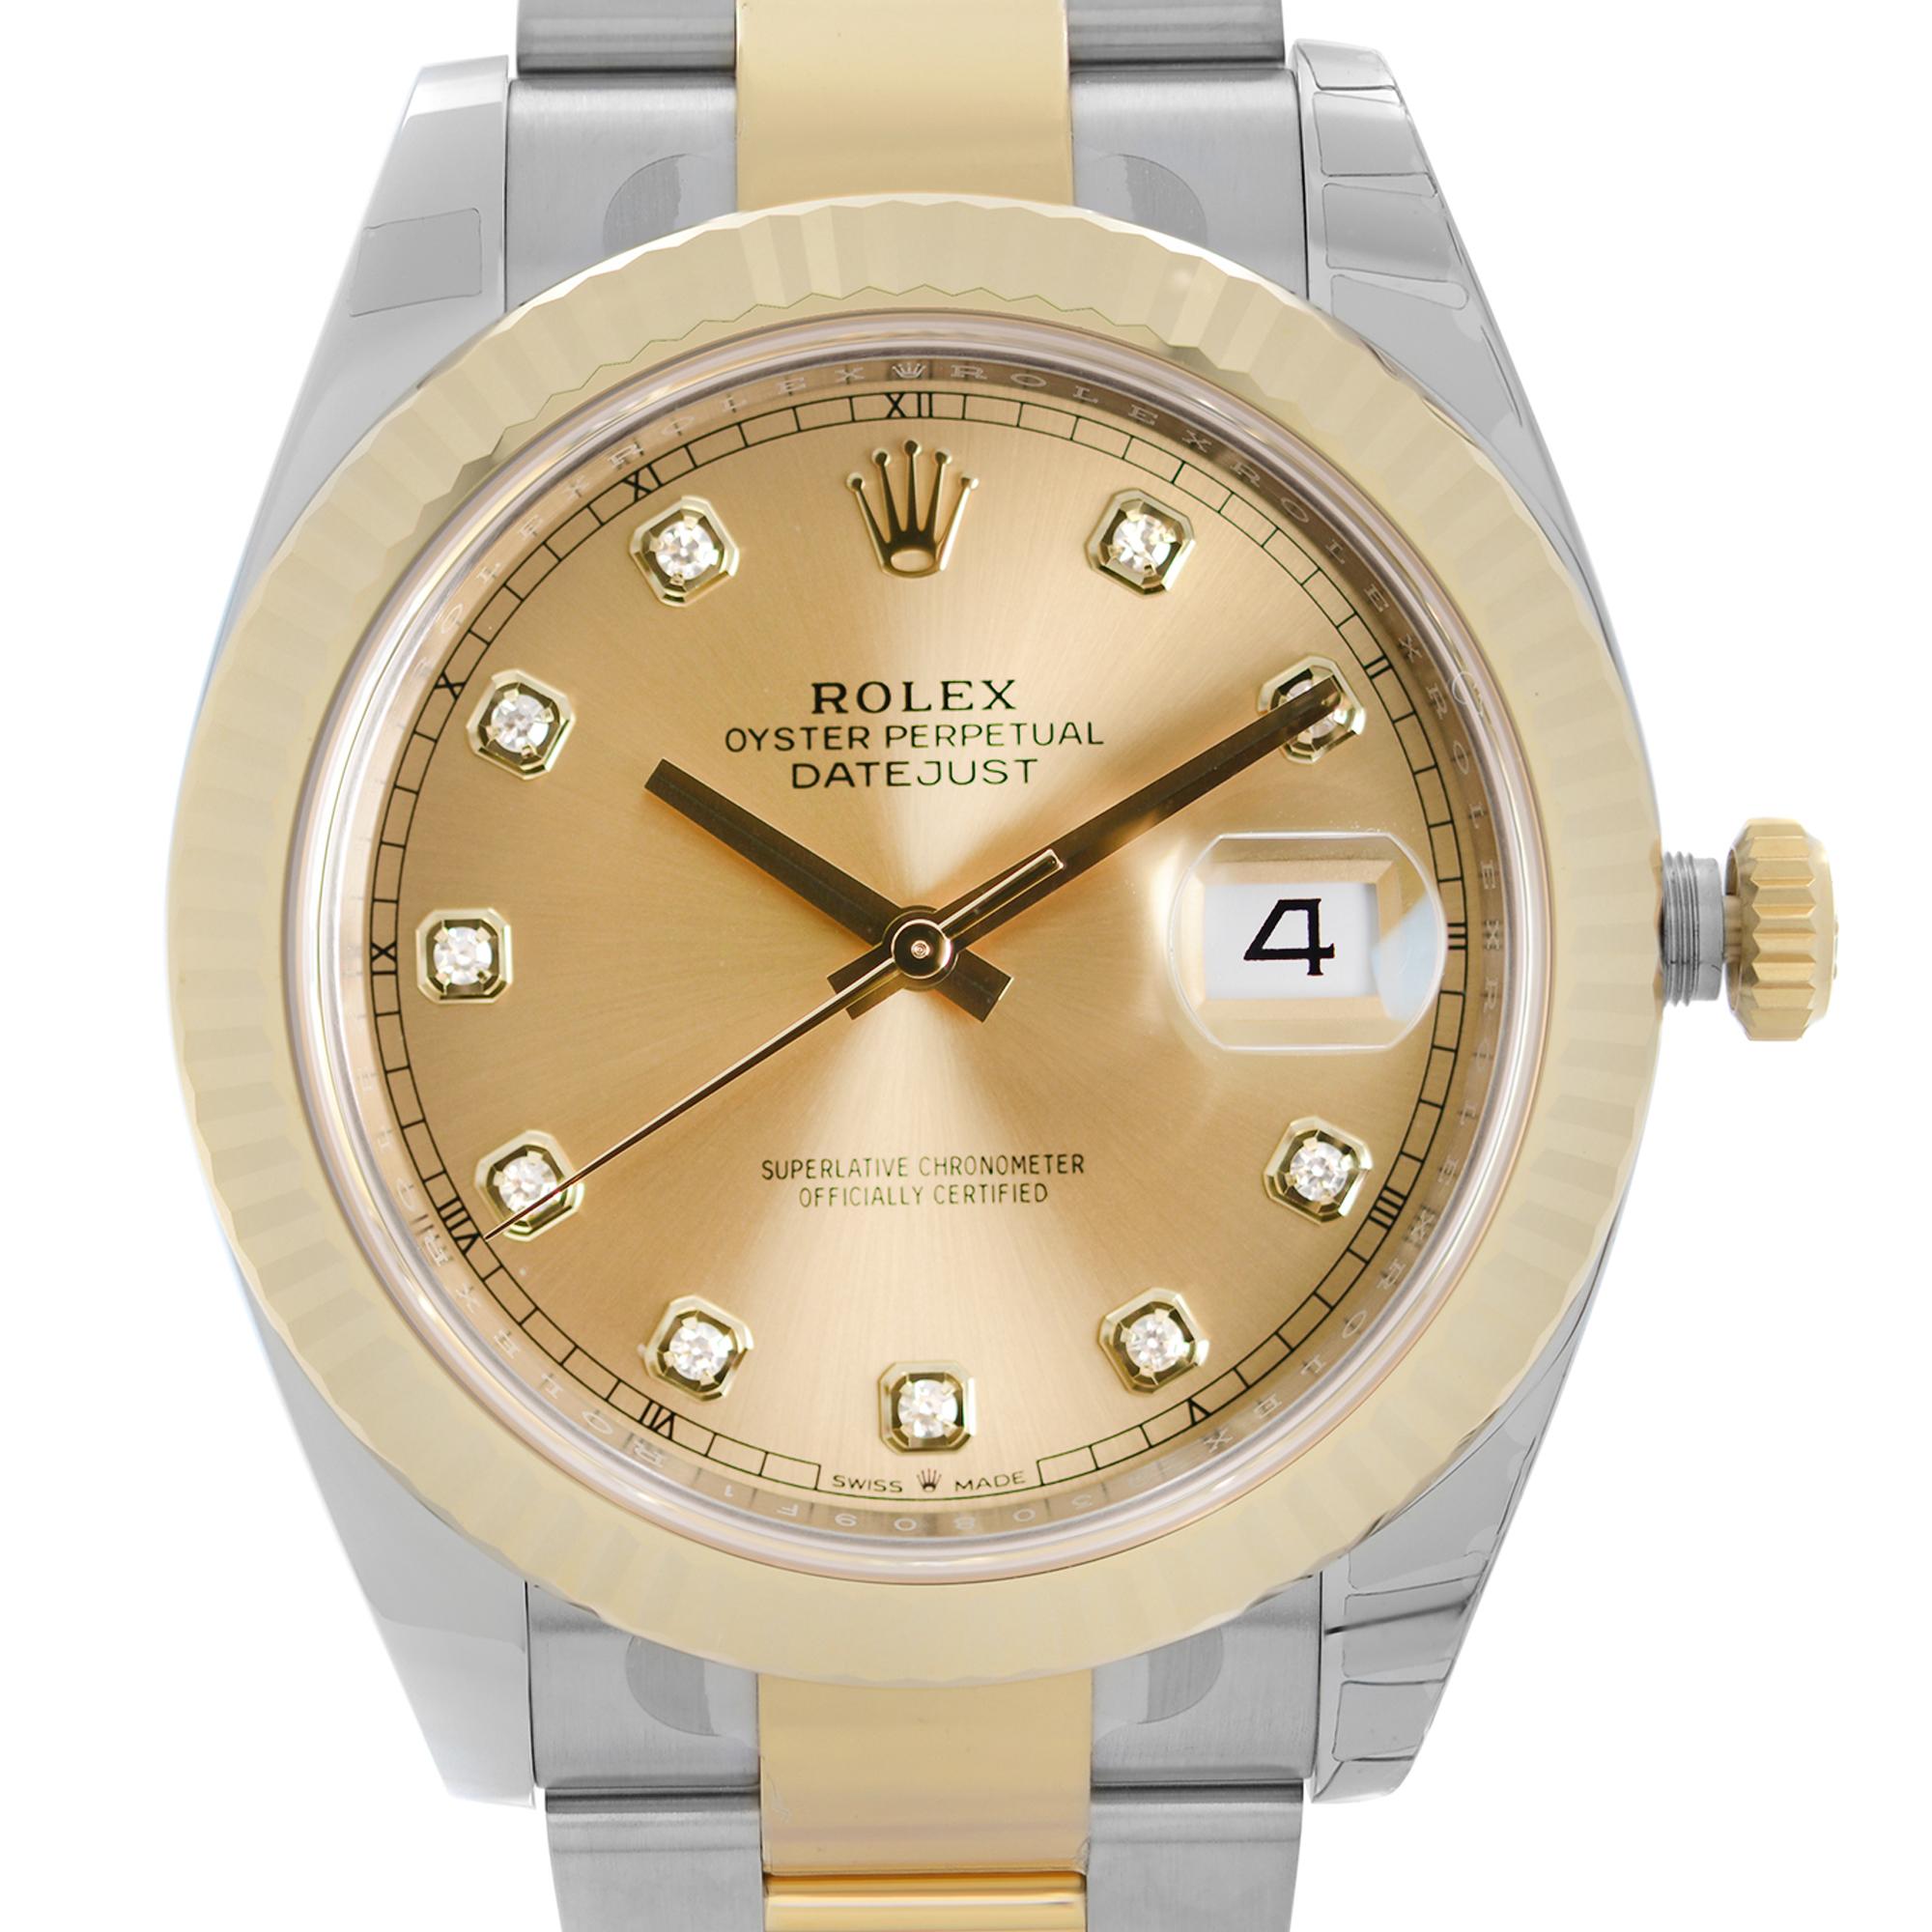 Unworn 2021 card. Rolex Datejust 41mm Yellow Gold Stainless Steel Champagne Diamond Dial Men's Automatic Watch 126333CDO.  This Timepiece is powered by an Automatic Movement and Features: Polished Steel Round Case. Stainless Steel and Yellow Gold